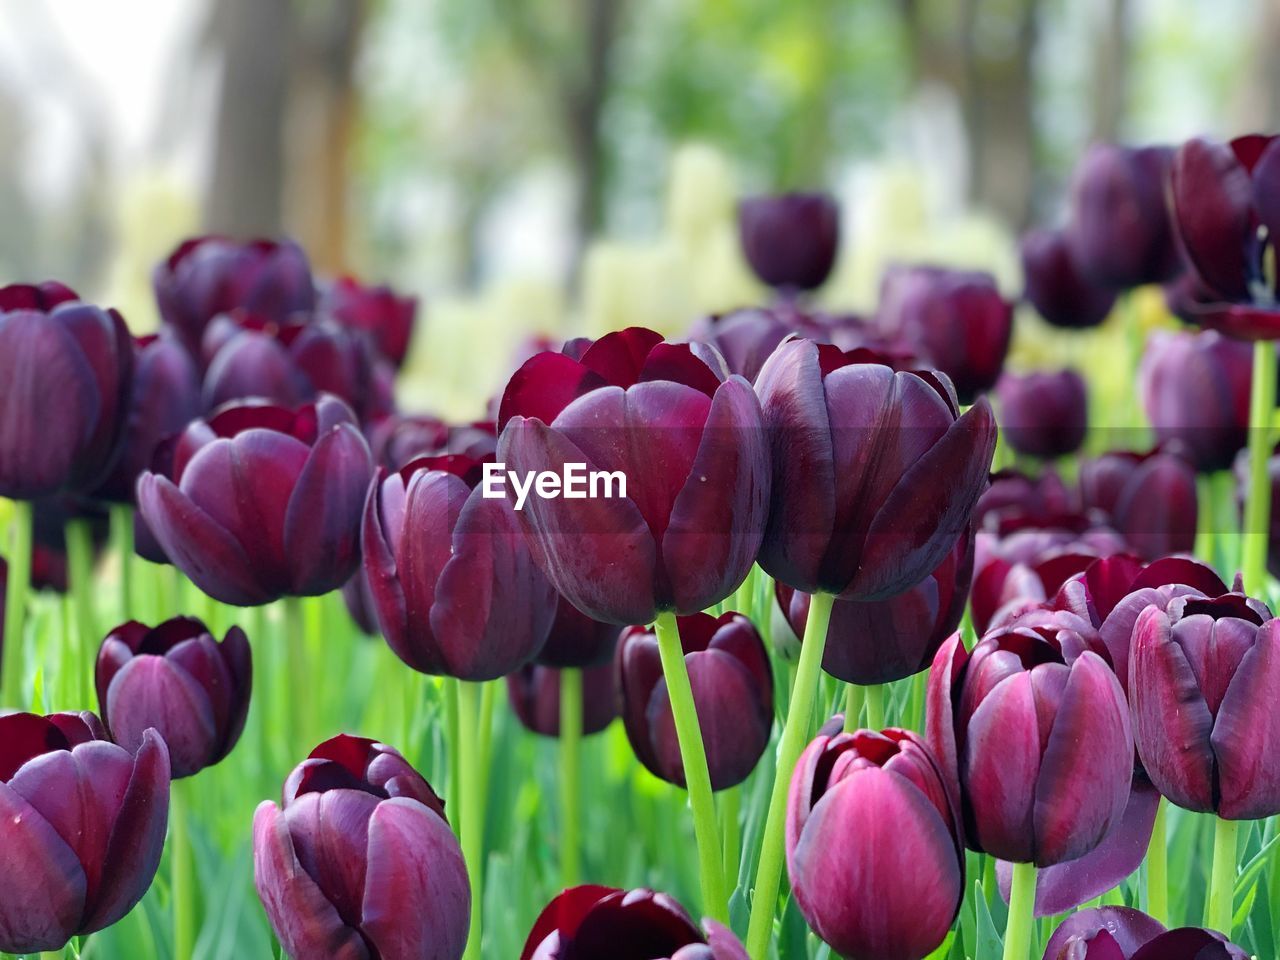 CLOSE-UP OF TULIPS IN BLOOM